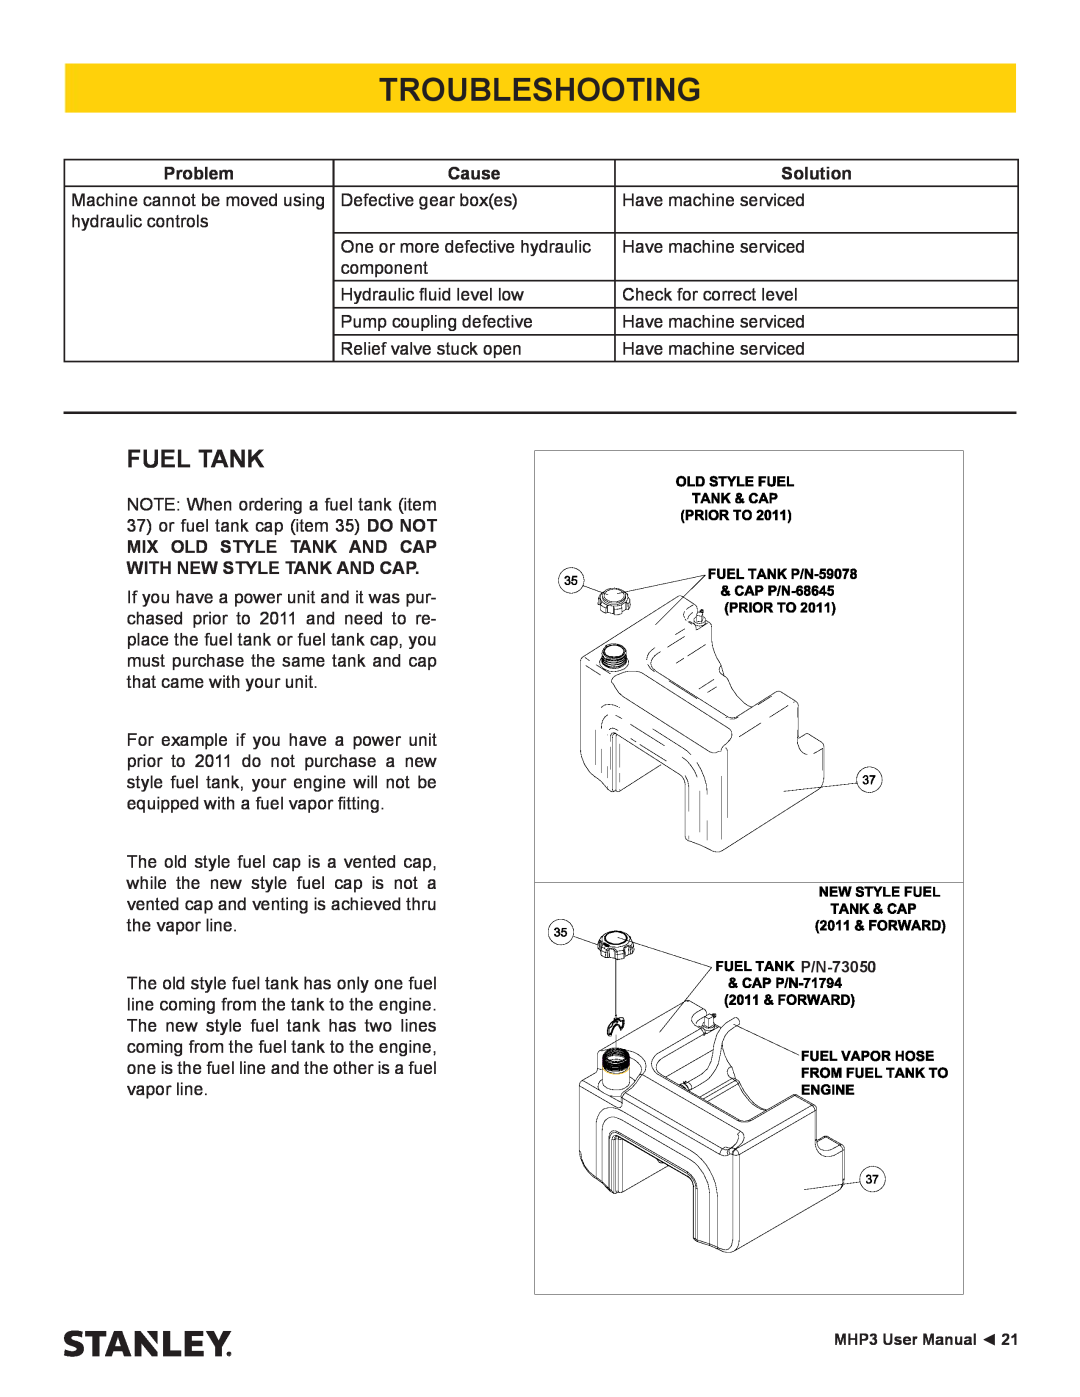 Stanley Black & Decker MHP3 user manual Fuel Tank, Troubleshooting, Problem, Cause, Solution 